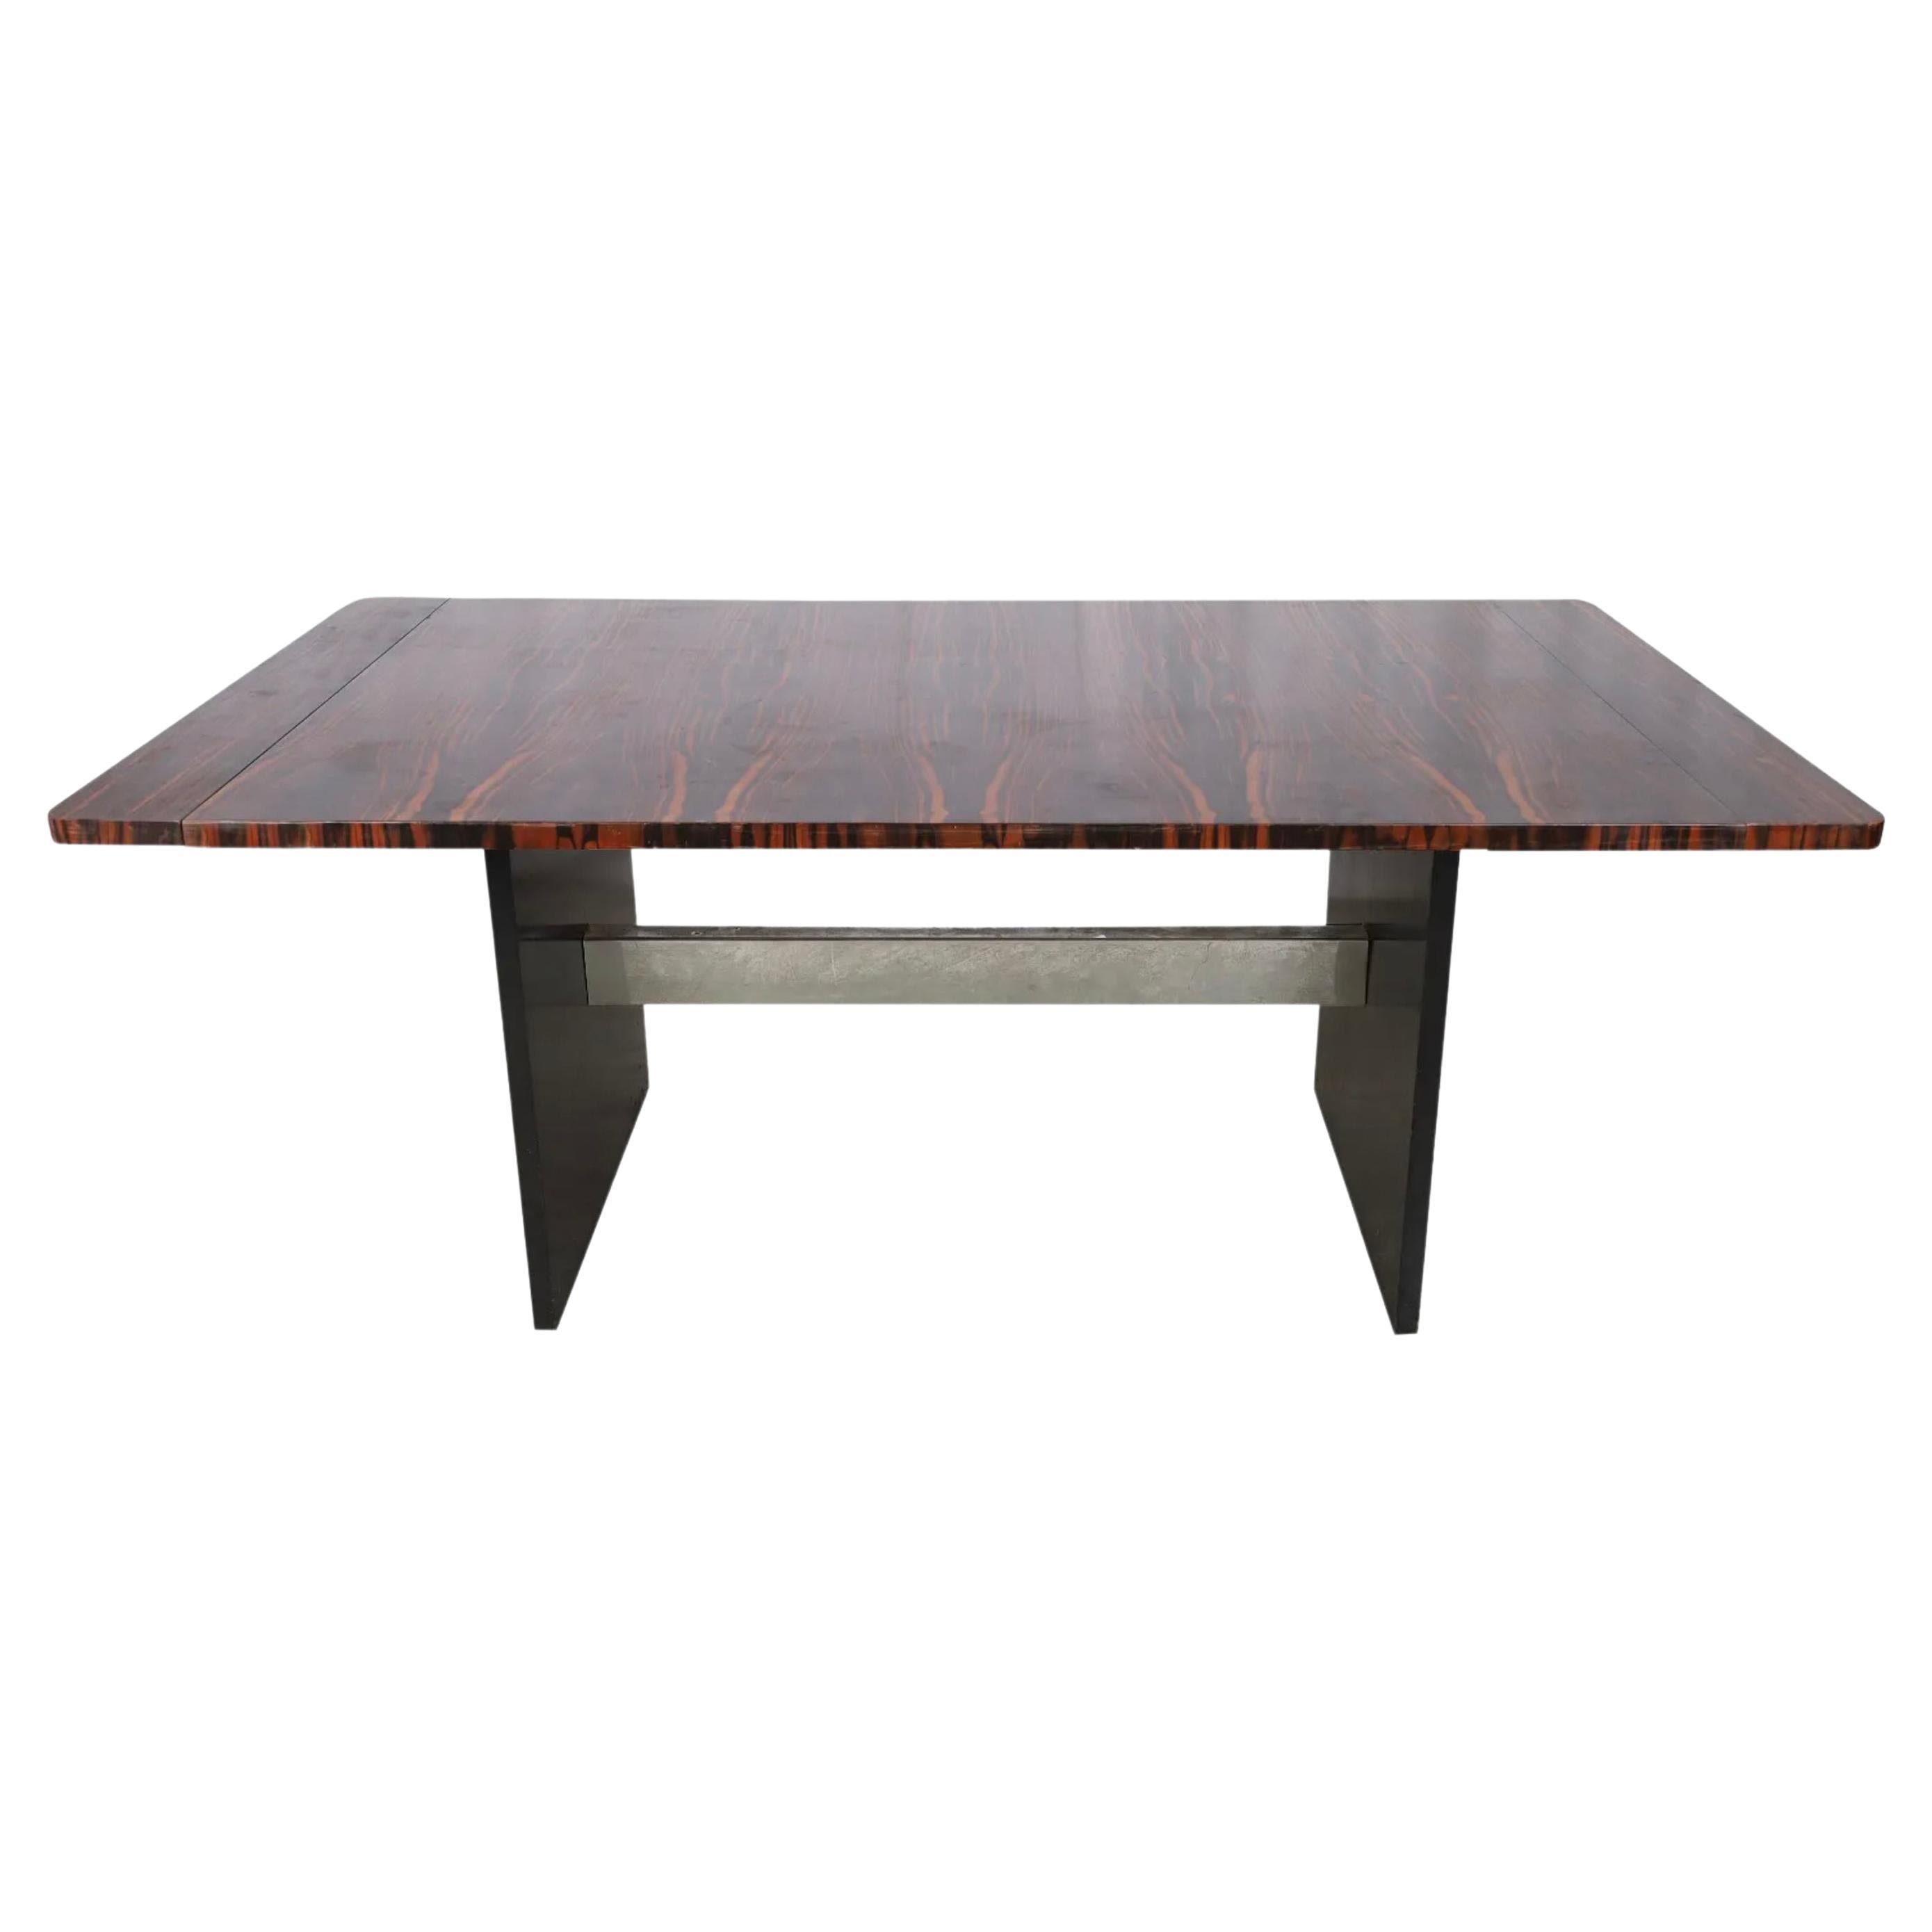 Superb Midcentury Brazilian Rosewood Modern Extension Dining Table 2 Leaves For Sale